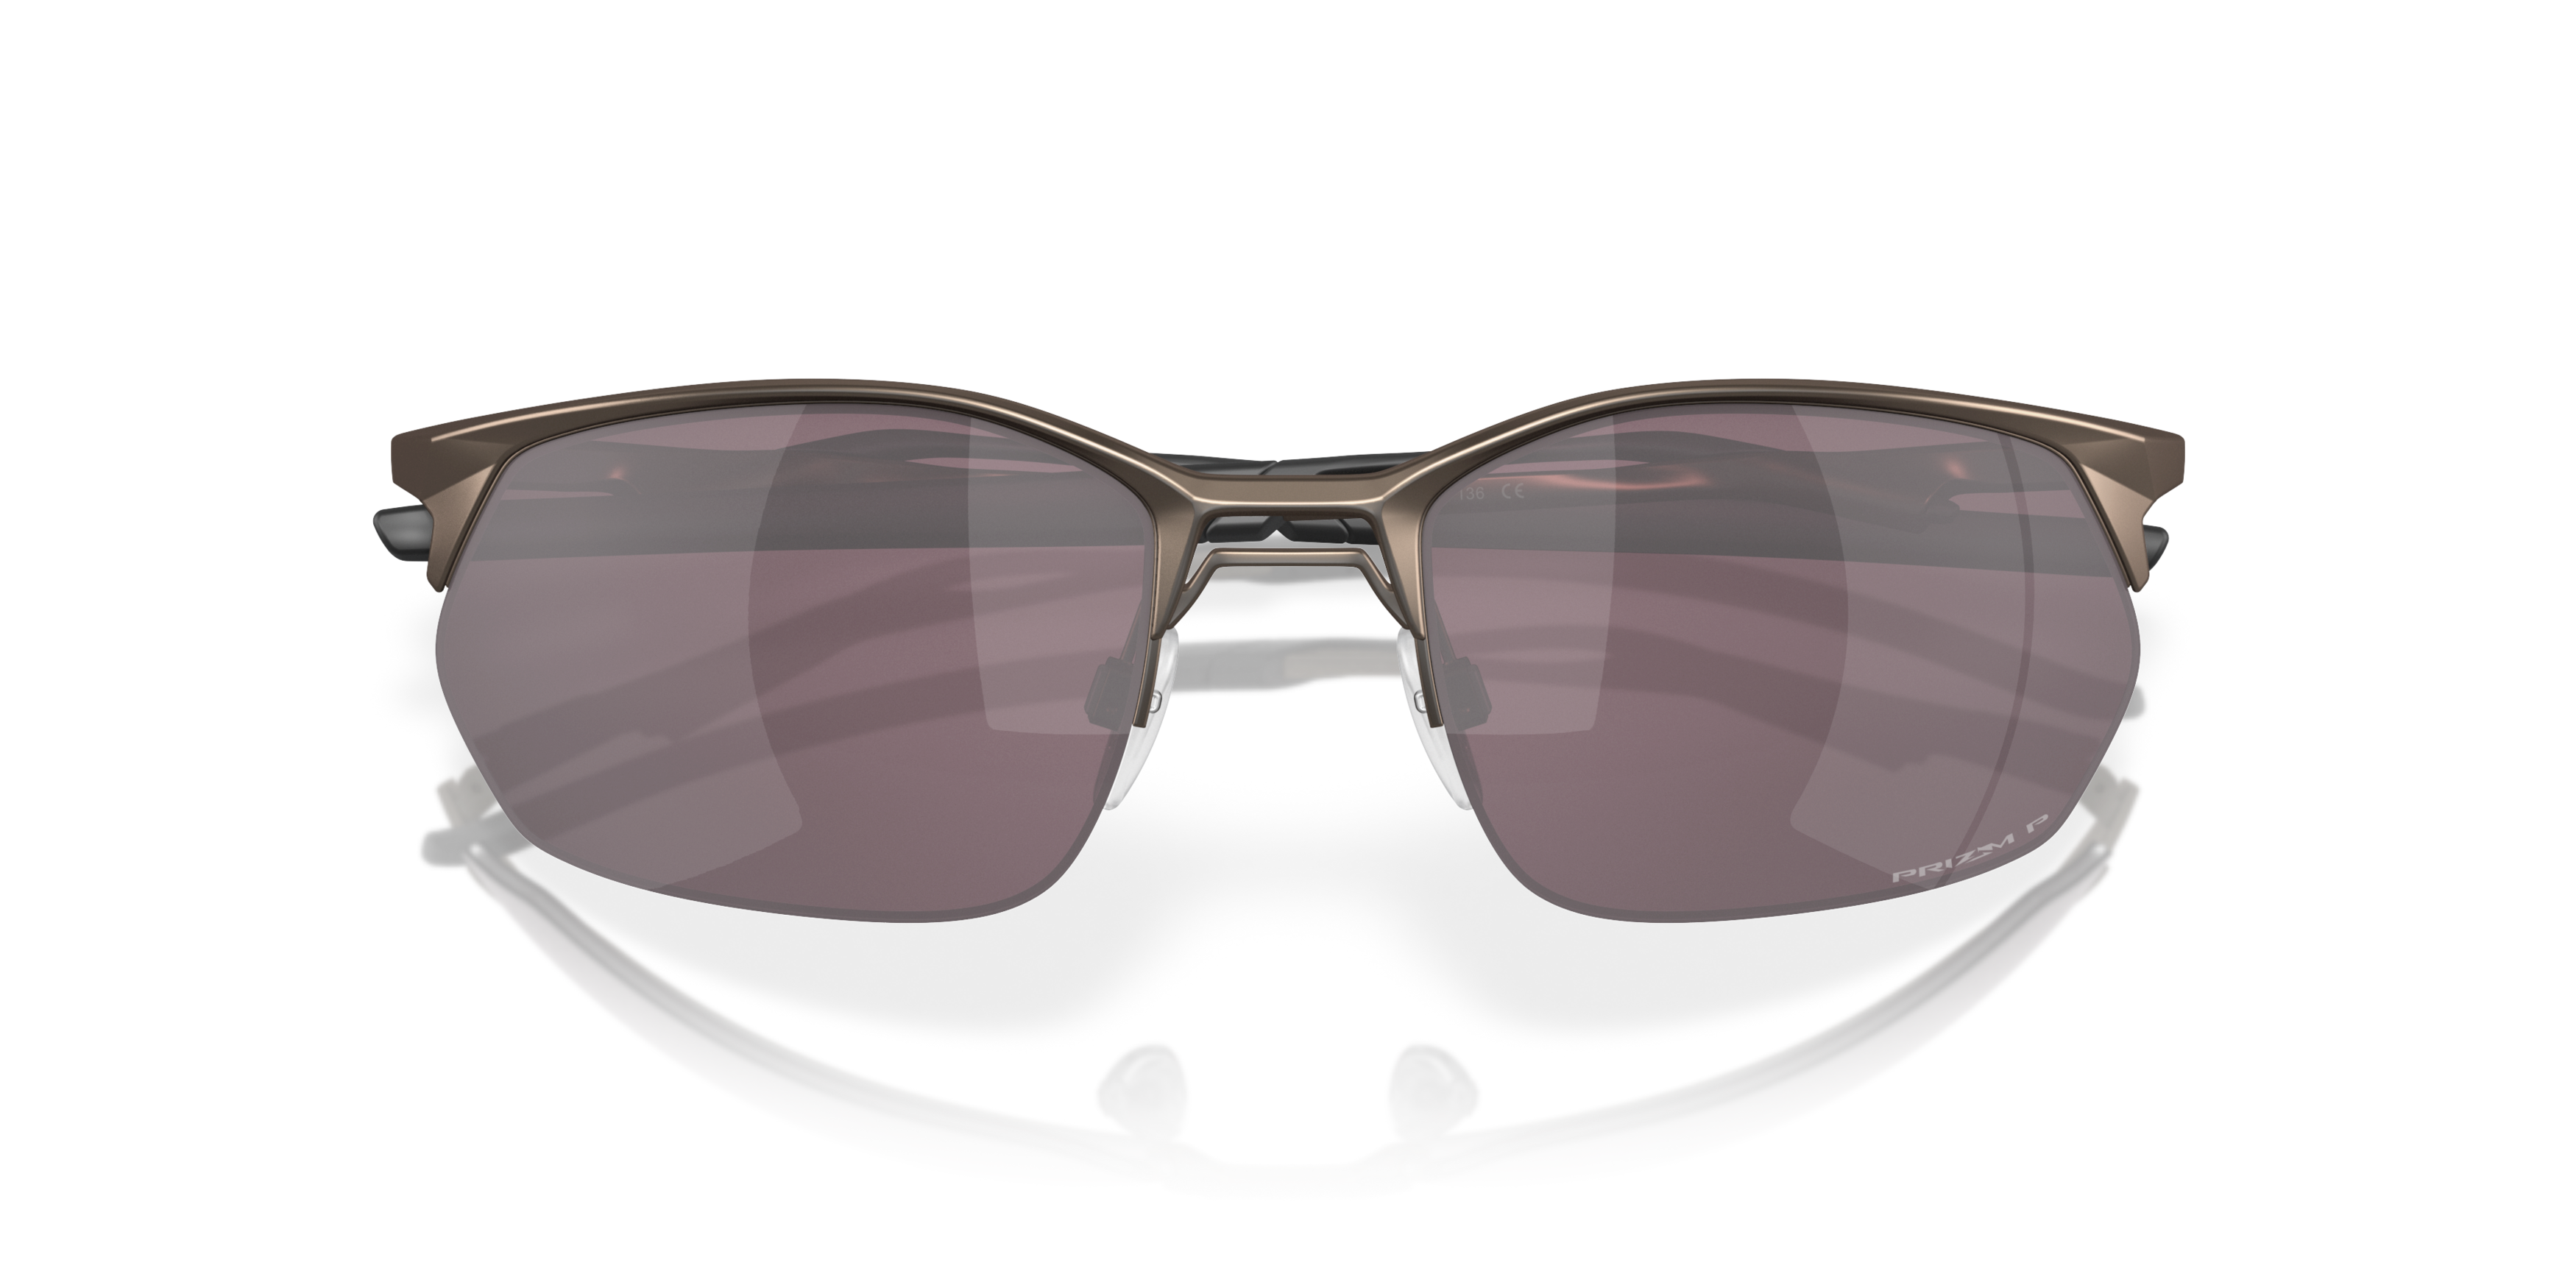 [products.image.folded] Oakley OO4145 414505